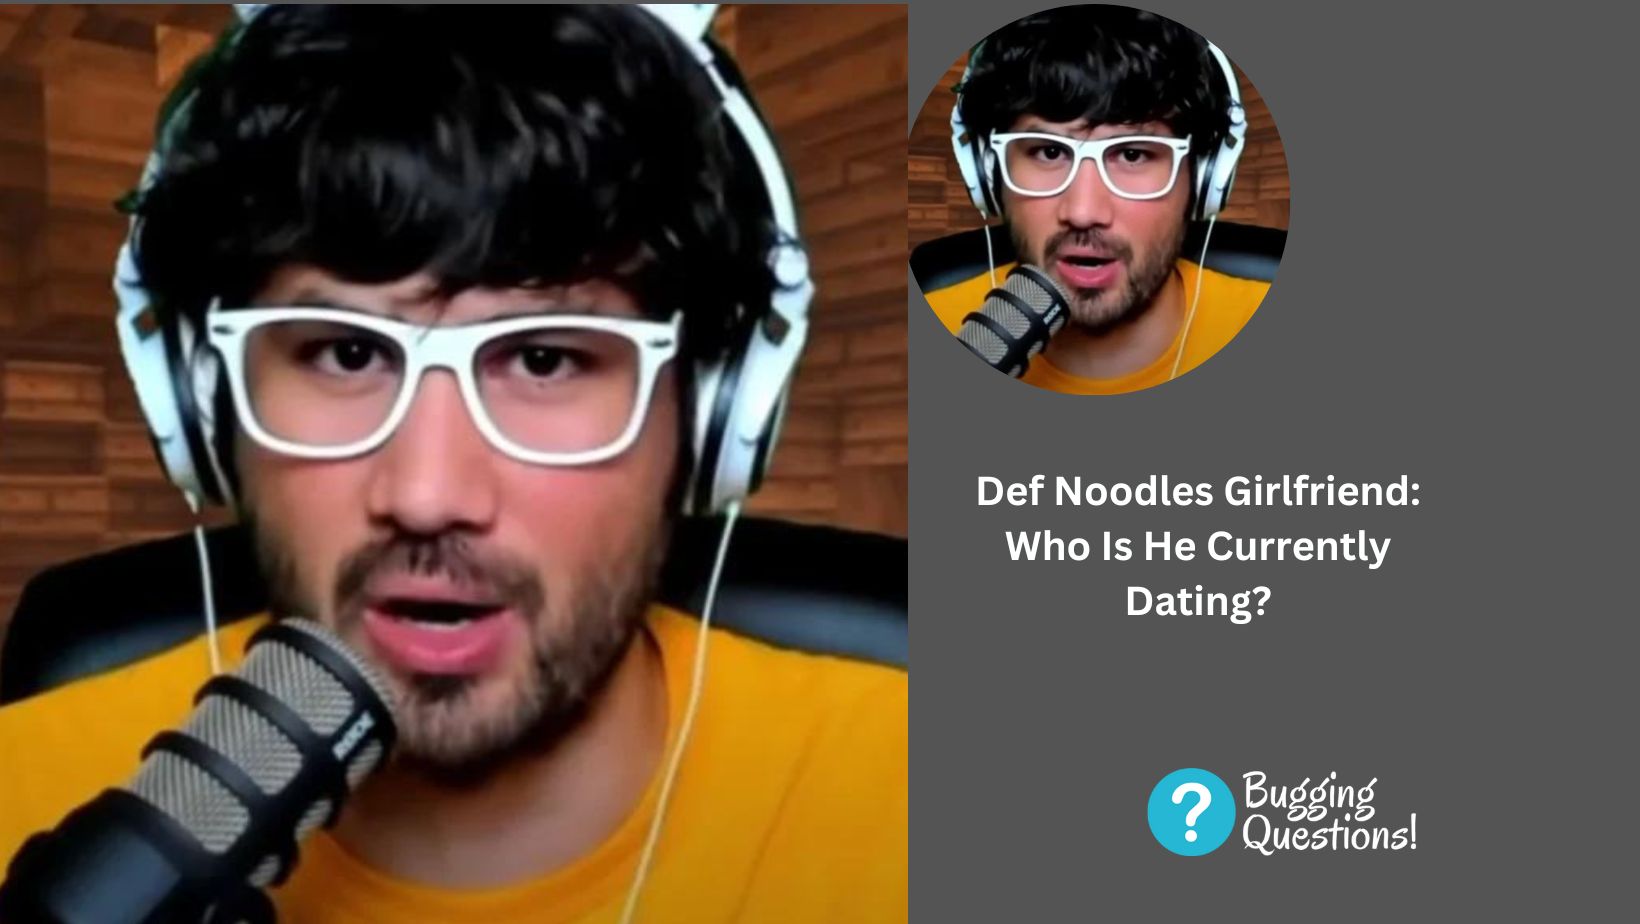 Def Noodles Girlfriend: Who Is He Currently Dating?